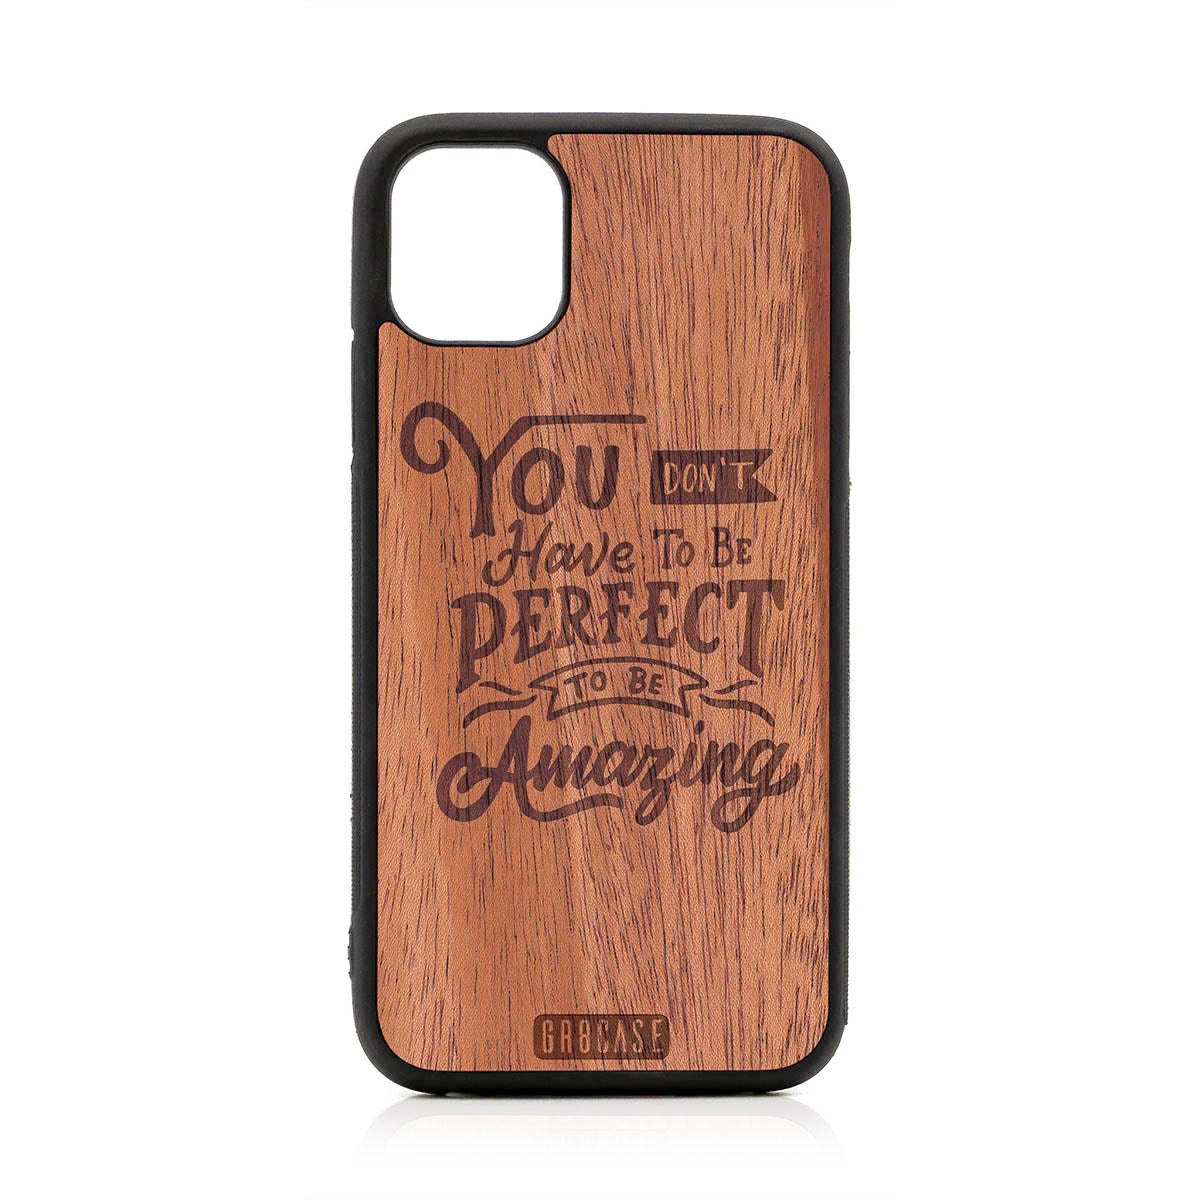 You Don't Have To Be Perfect To Be Amazing Design Wood Case For iPhone 11